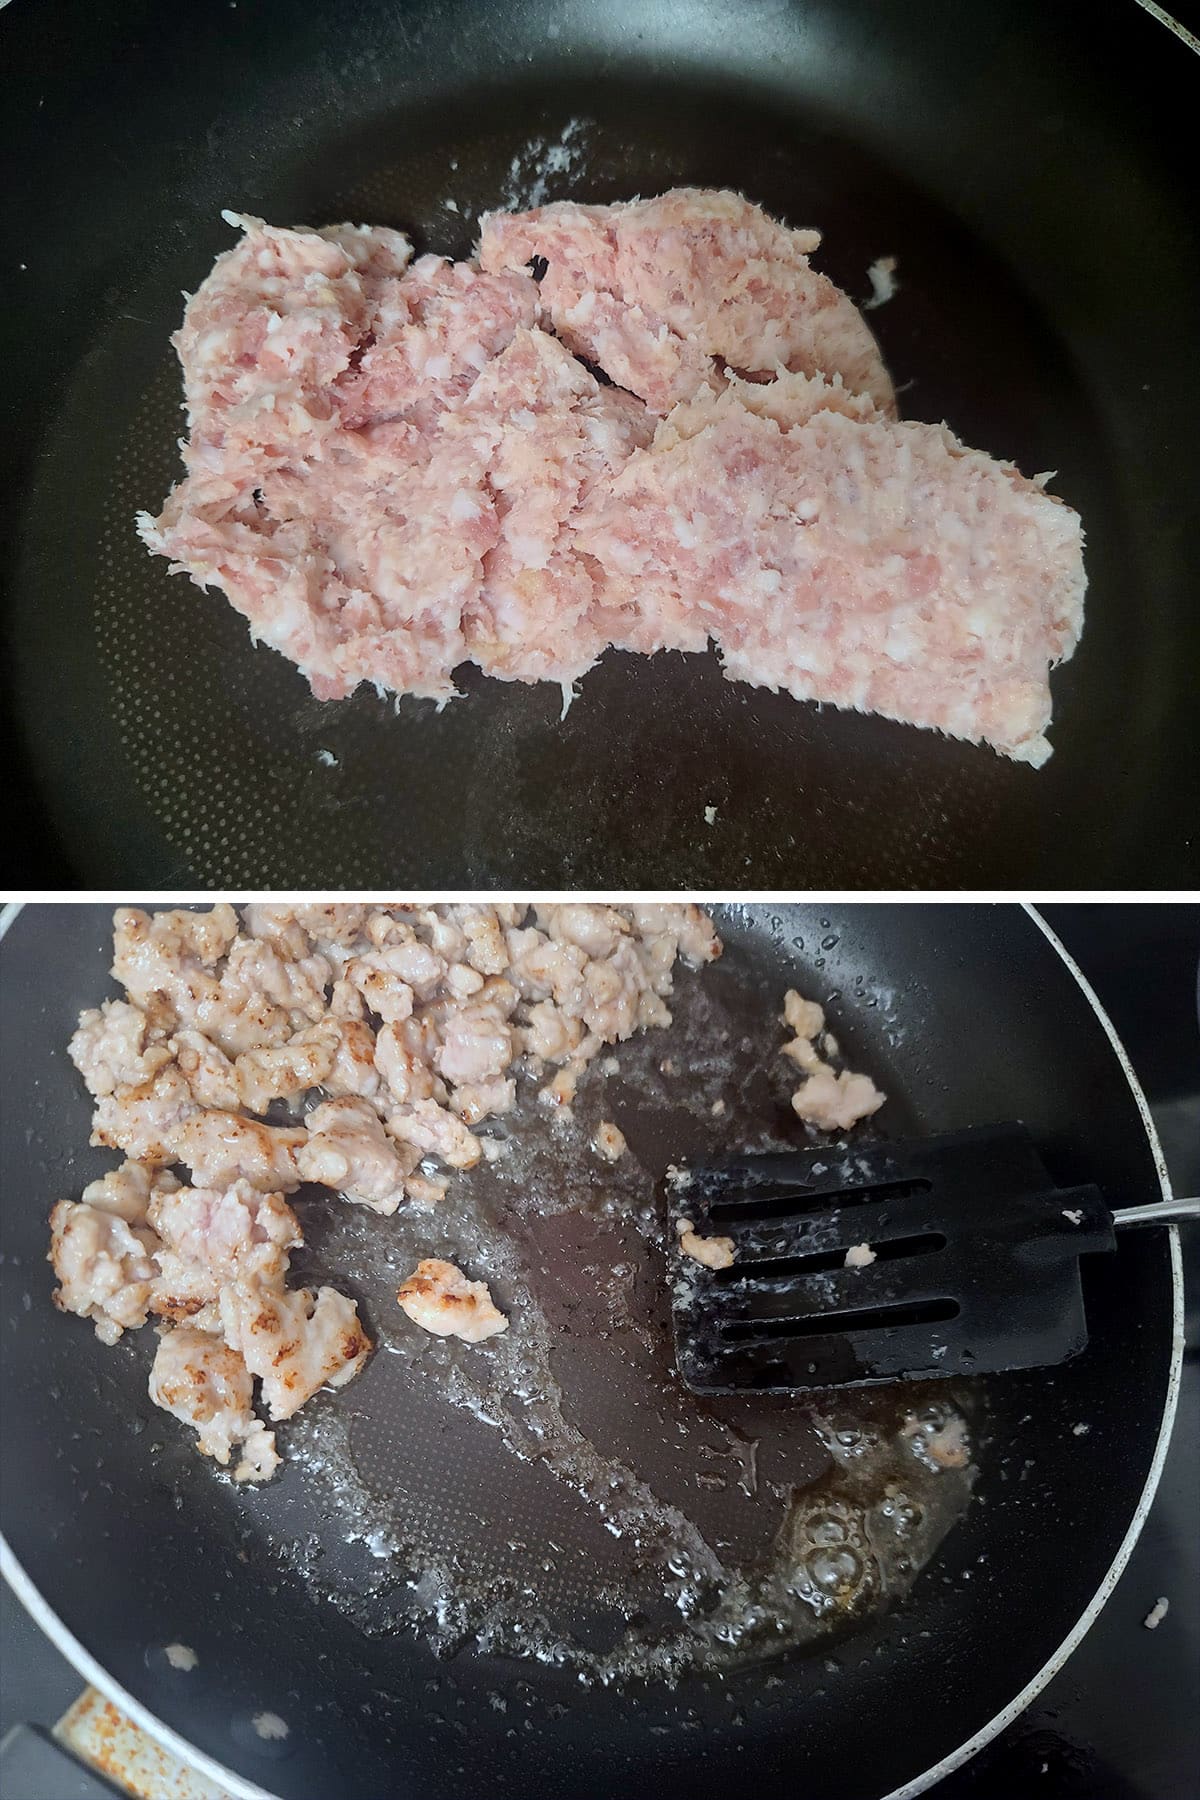 A 2 part image showing a chunk of maple leaf pork sausage being cooked up.